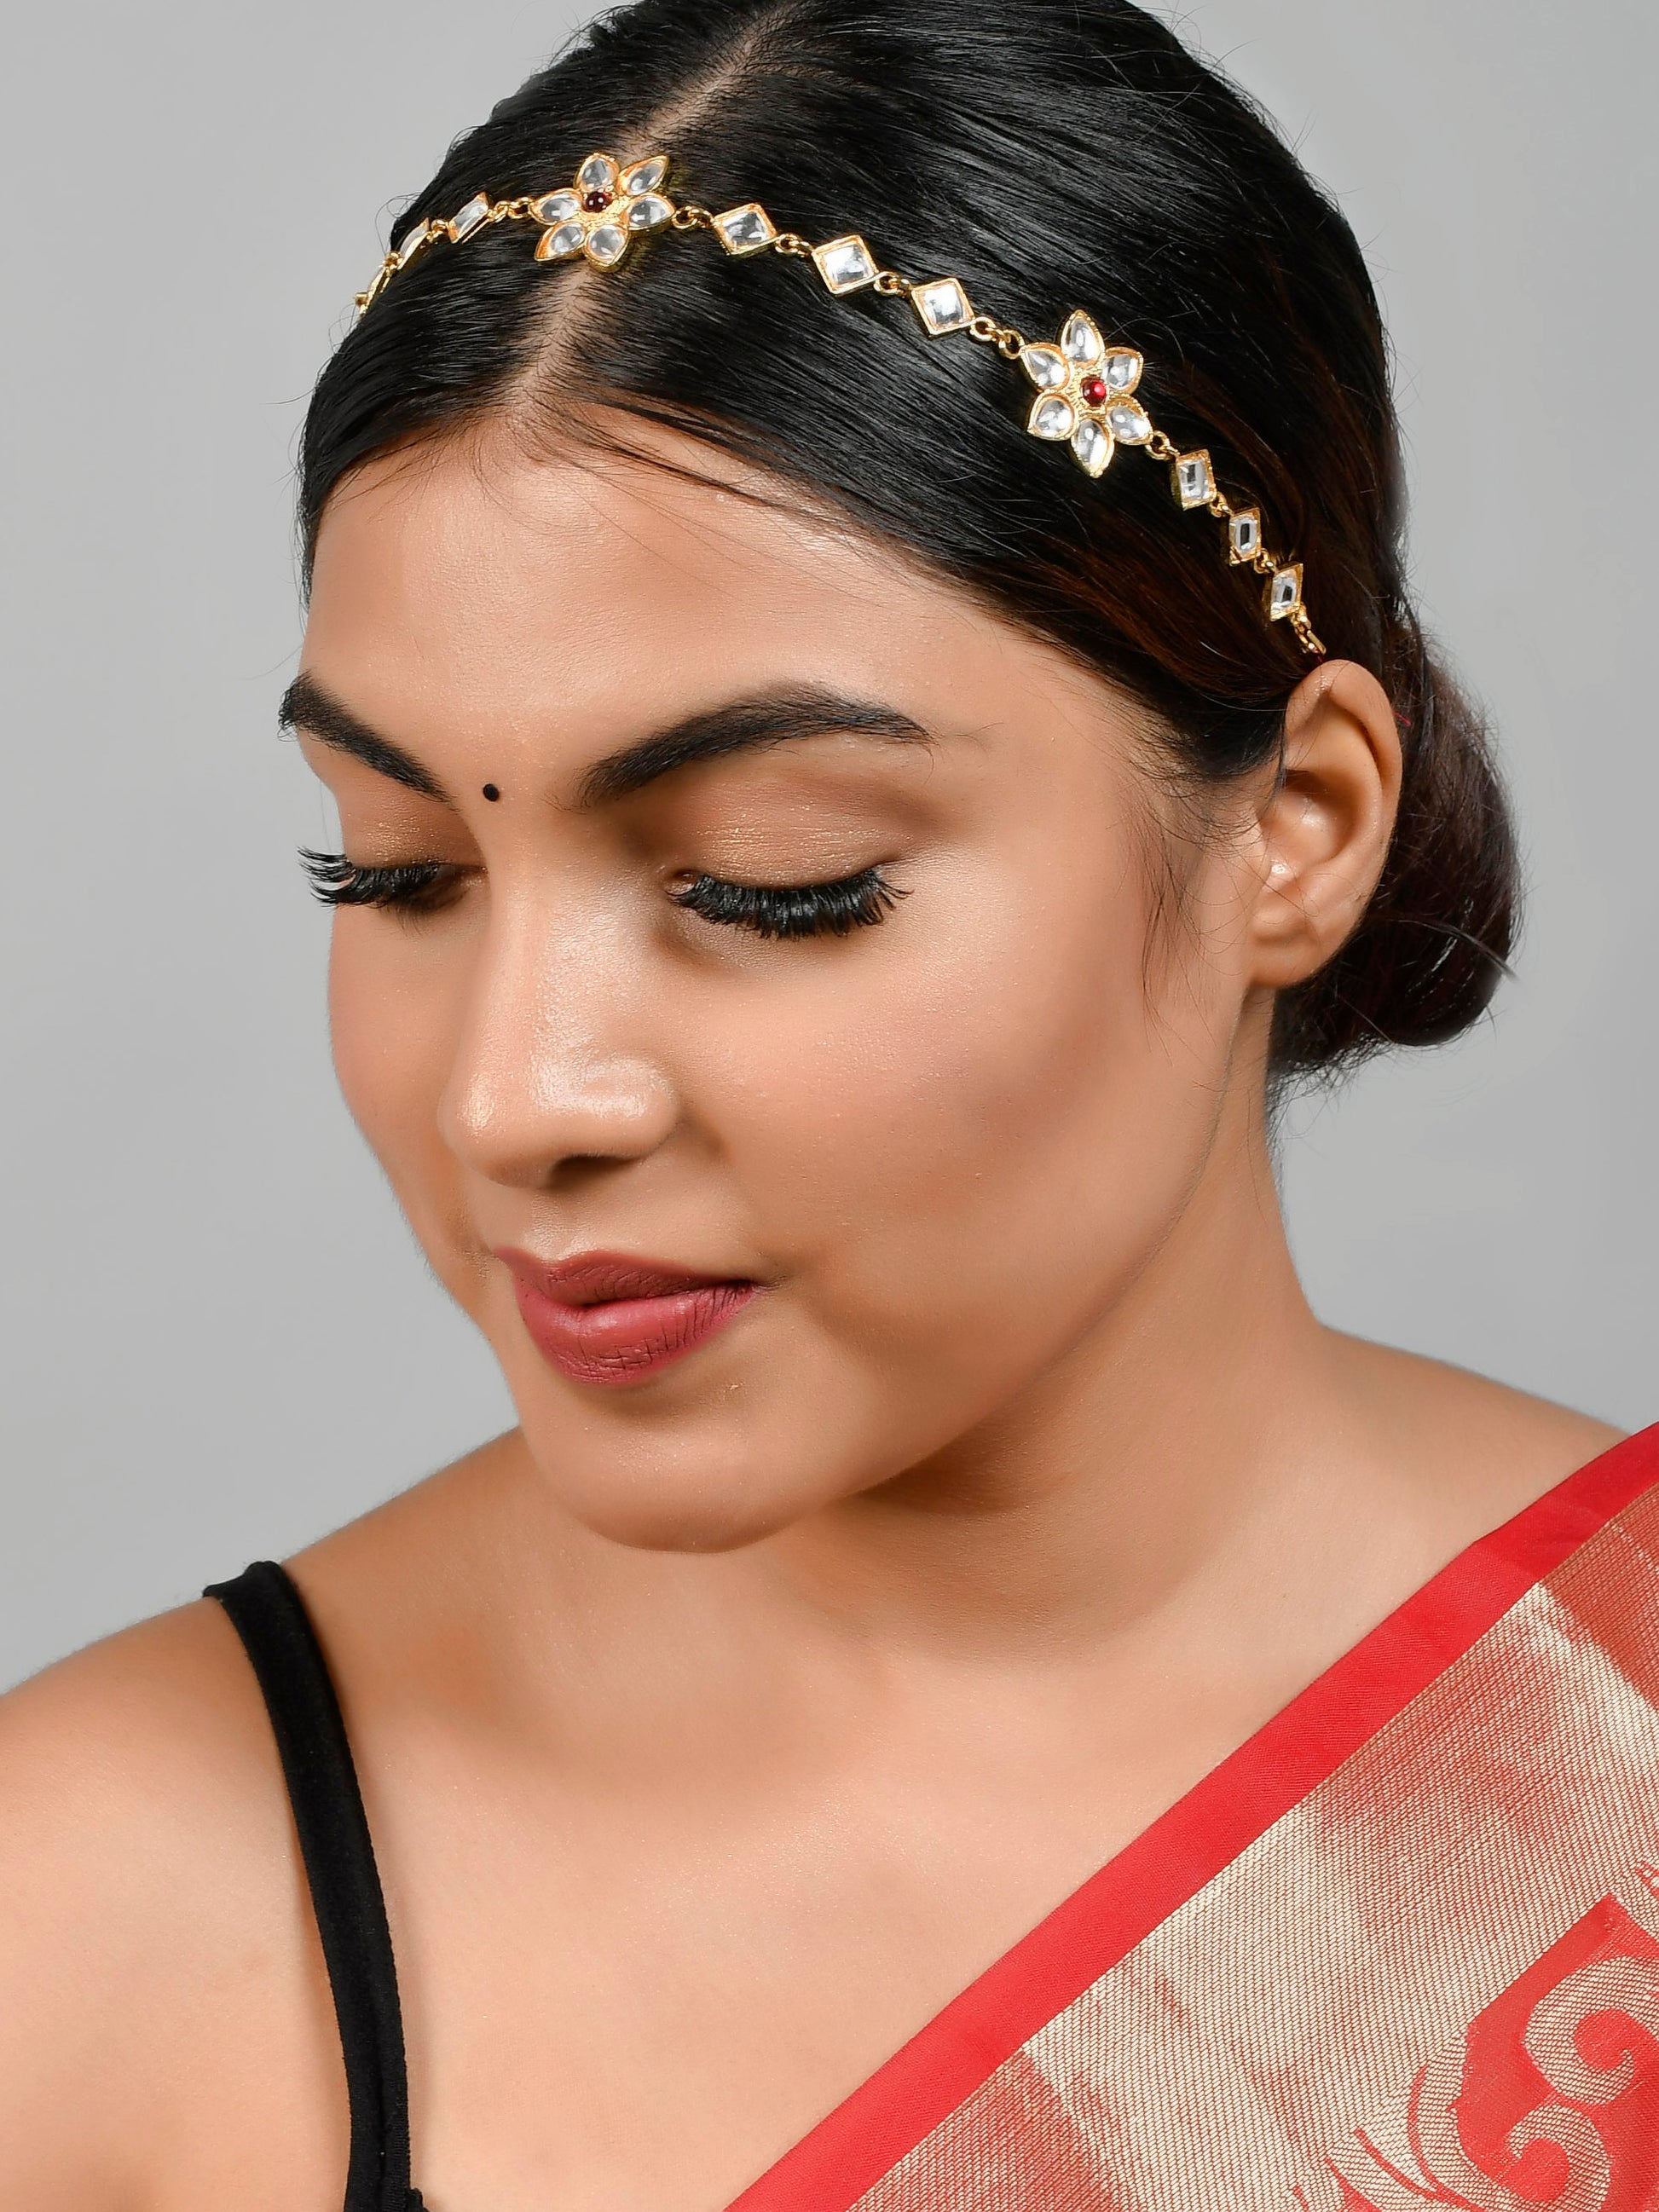 Gold Plated Floral Headchain